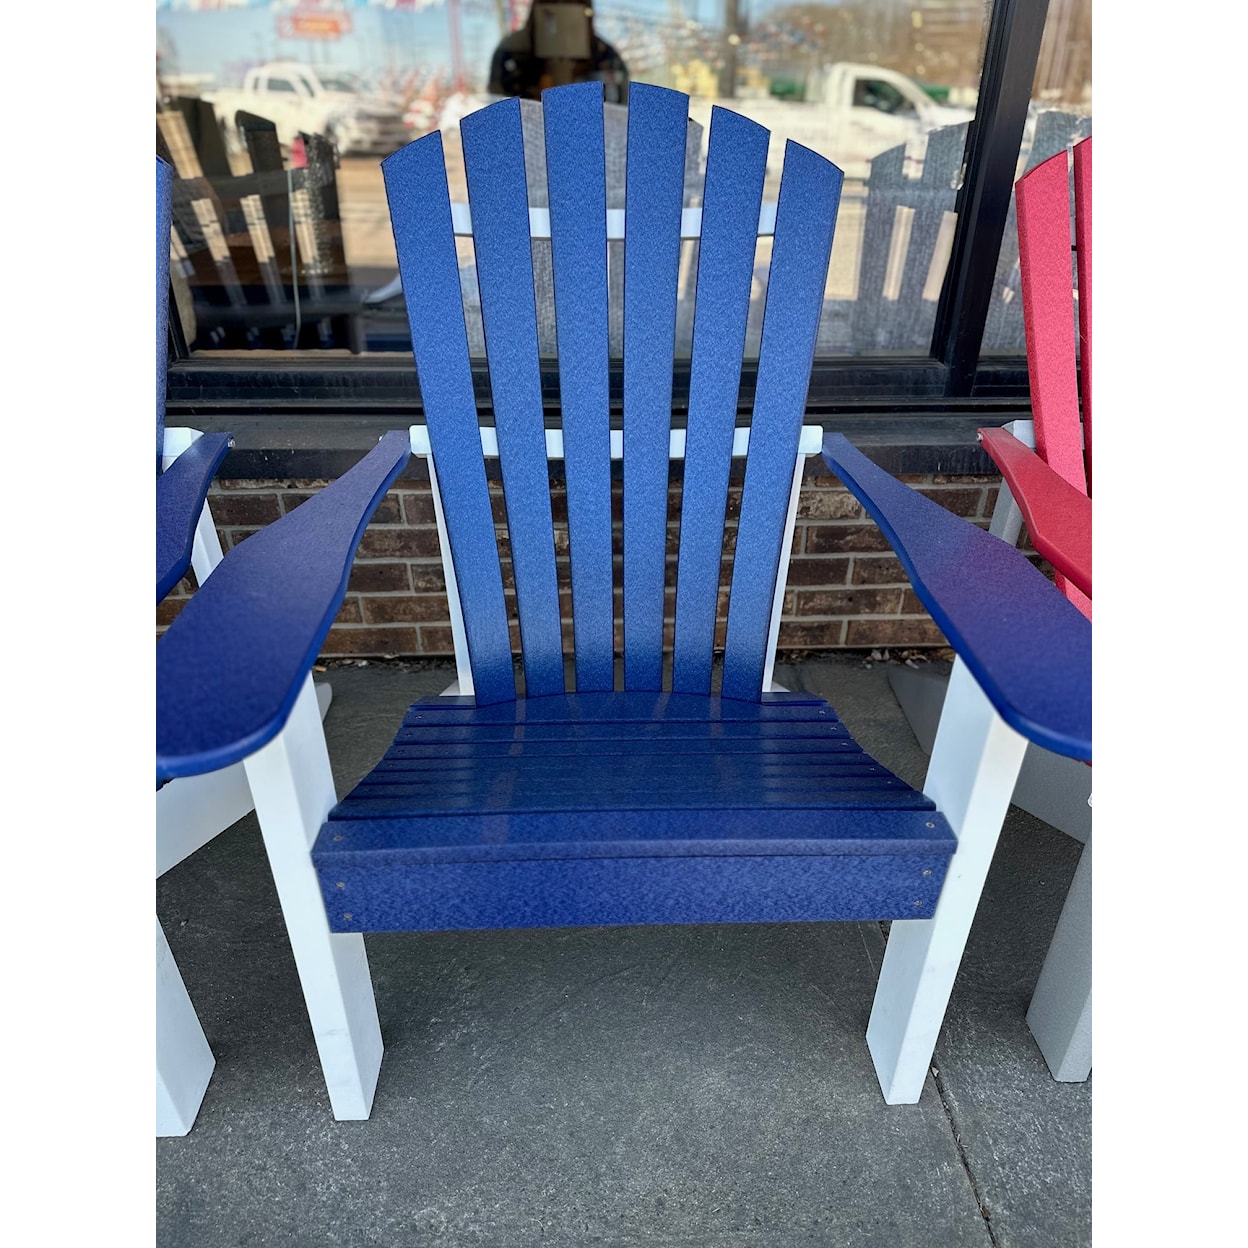 Hoosier Poly Products Poly Adirondack Chairs Poly Adirondack Chair